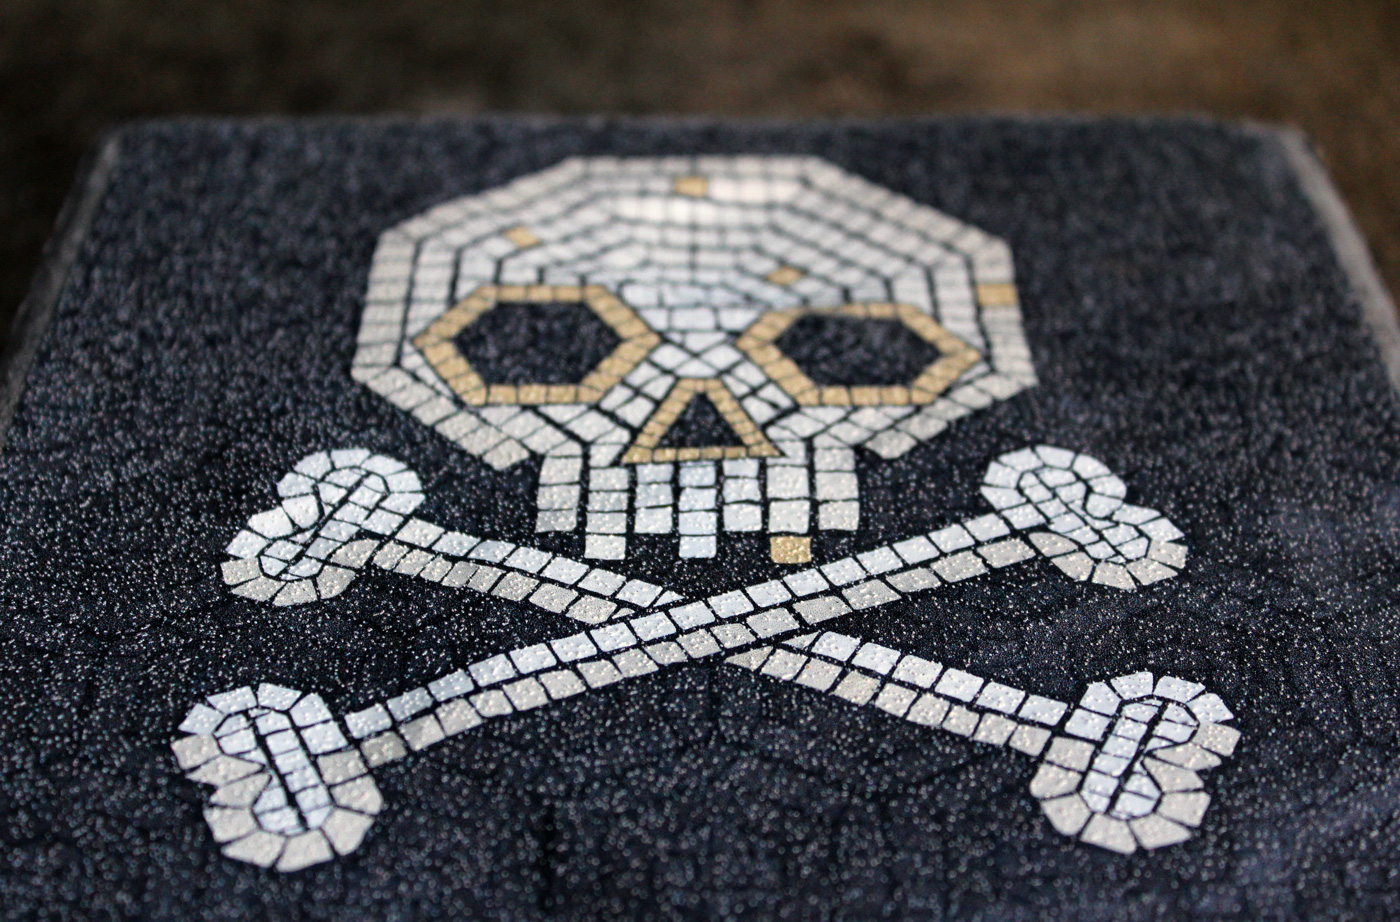 Skull and Bones Decal on a Concrete Paver